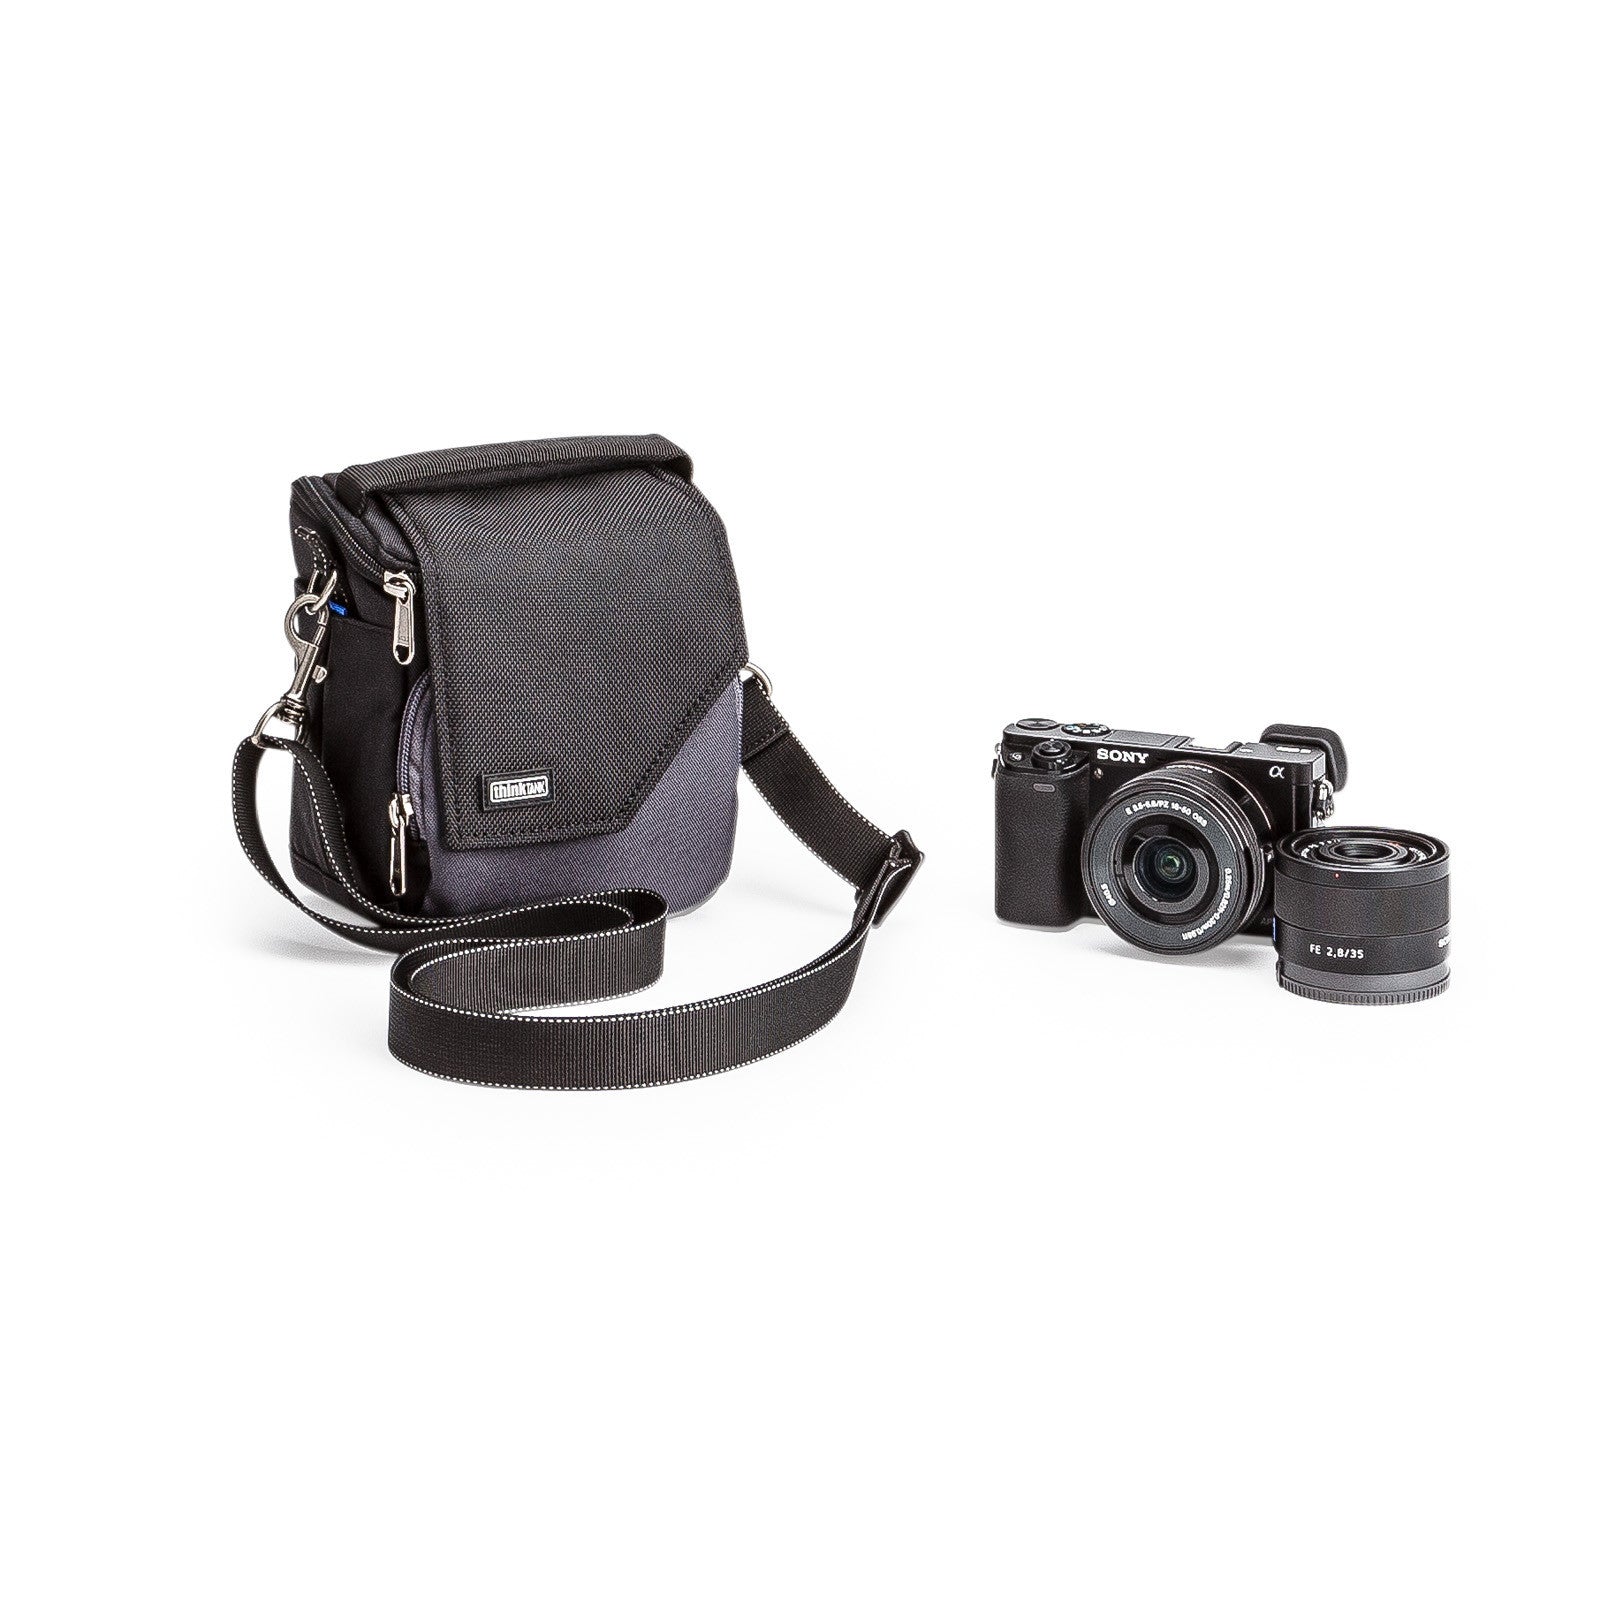 Think Tank Mirrorless Mover 10 Camera Bag (Charcoal), bags shoulder bags, Think Tank Photo - Pictureline  - 1